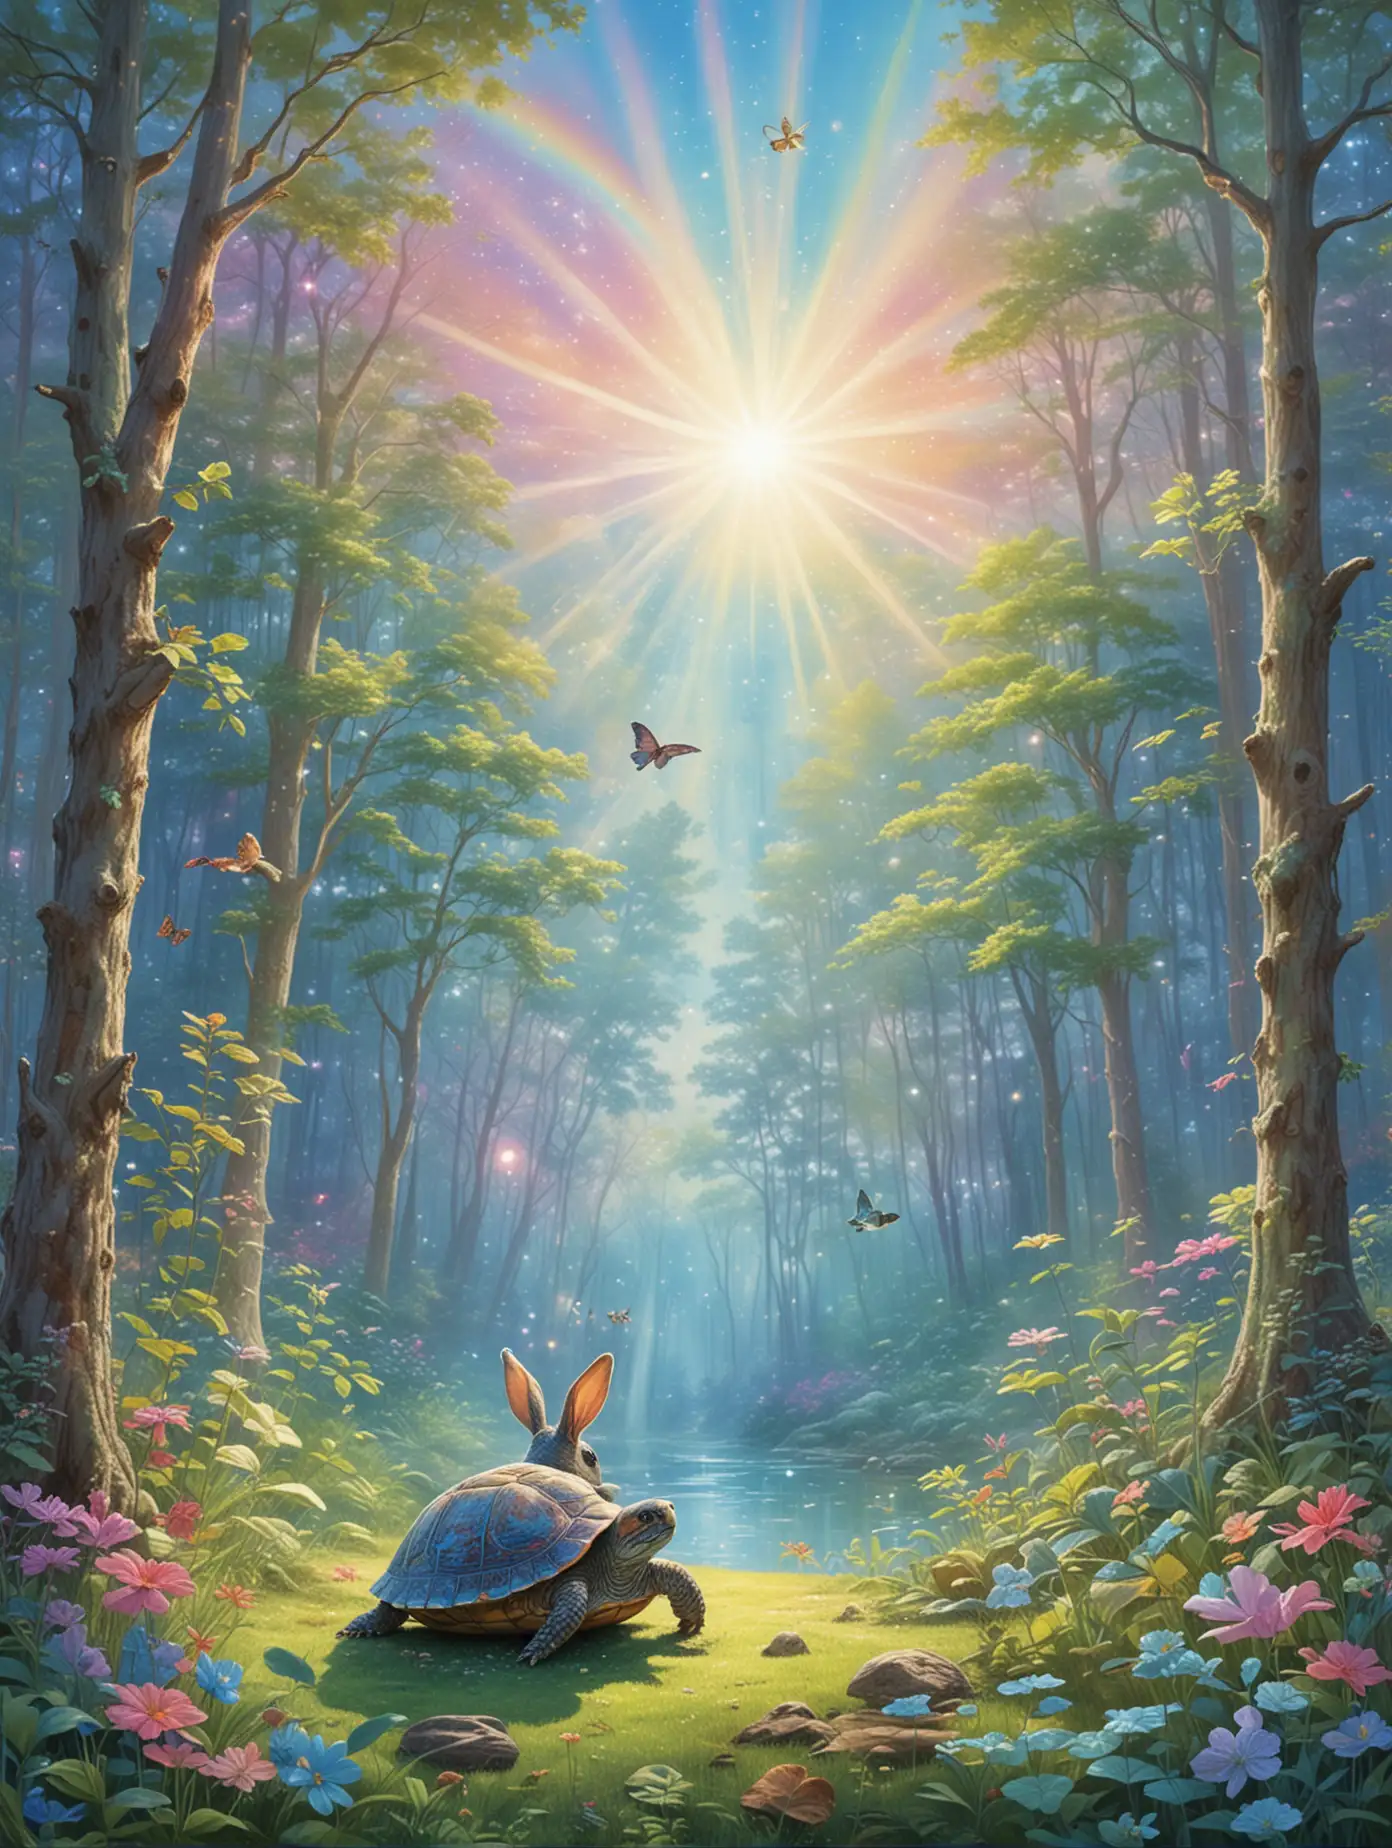 please create a transcendent pastel rainbow sparkly heavenly artwork of a peaceful, bright, magical forest, with clear blue skies. there is a turtle. there is a bunny meditating, children's book illustration poster